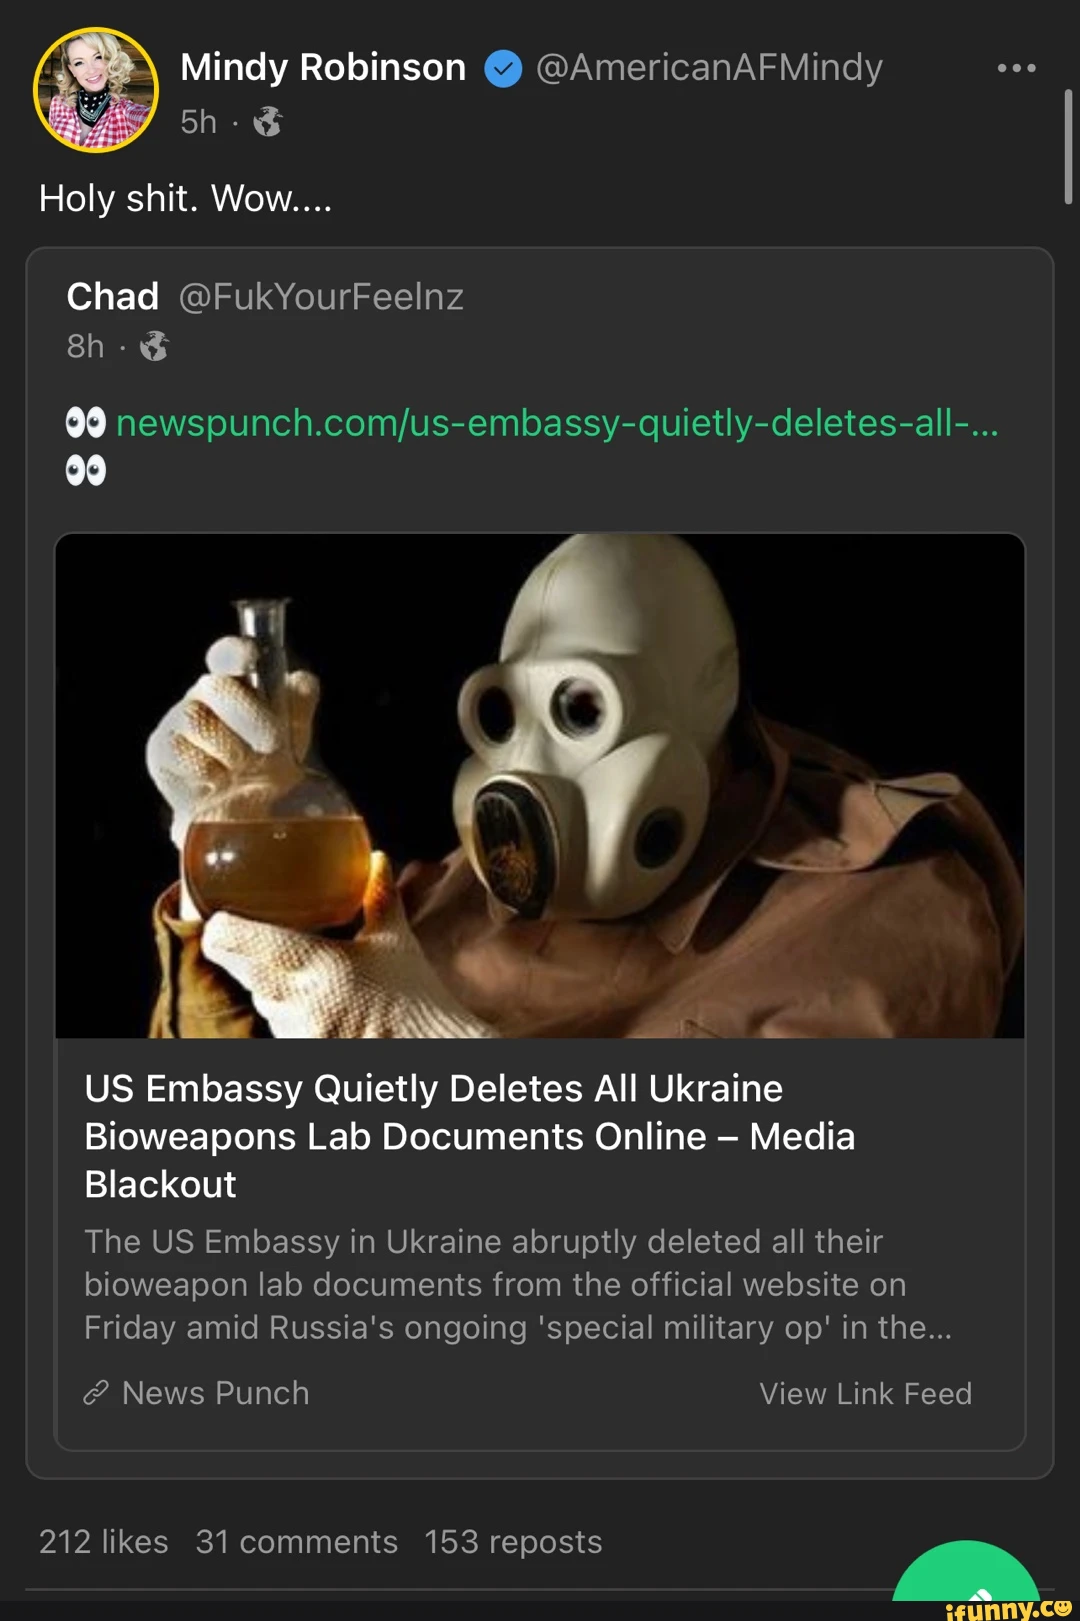 Mindy Robinson @AmericanAF Mindy Holy shit. Wow.... Chad @FukYourFeelnz 00 US Embassy Quietly Deletes All Ukraine Bioweapons Lab Documents Online Media Blackout The US Embassy in Ukraine abruptly deleted all their bioweapon lab documents from the official website on Friday amid Russia's ongoing 'special military op' in the... News Punch View Link Feed 212 likes 31 comments 153 reposts